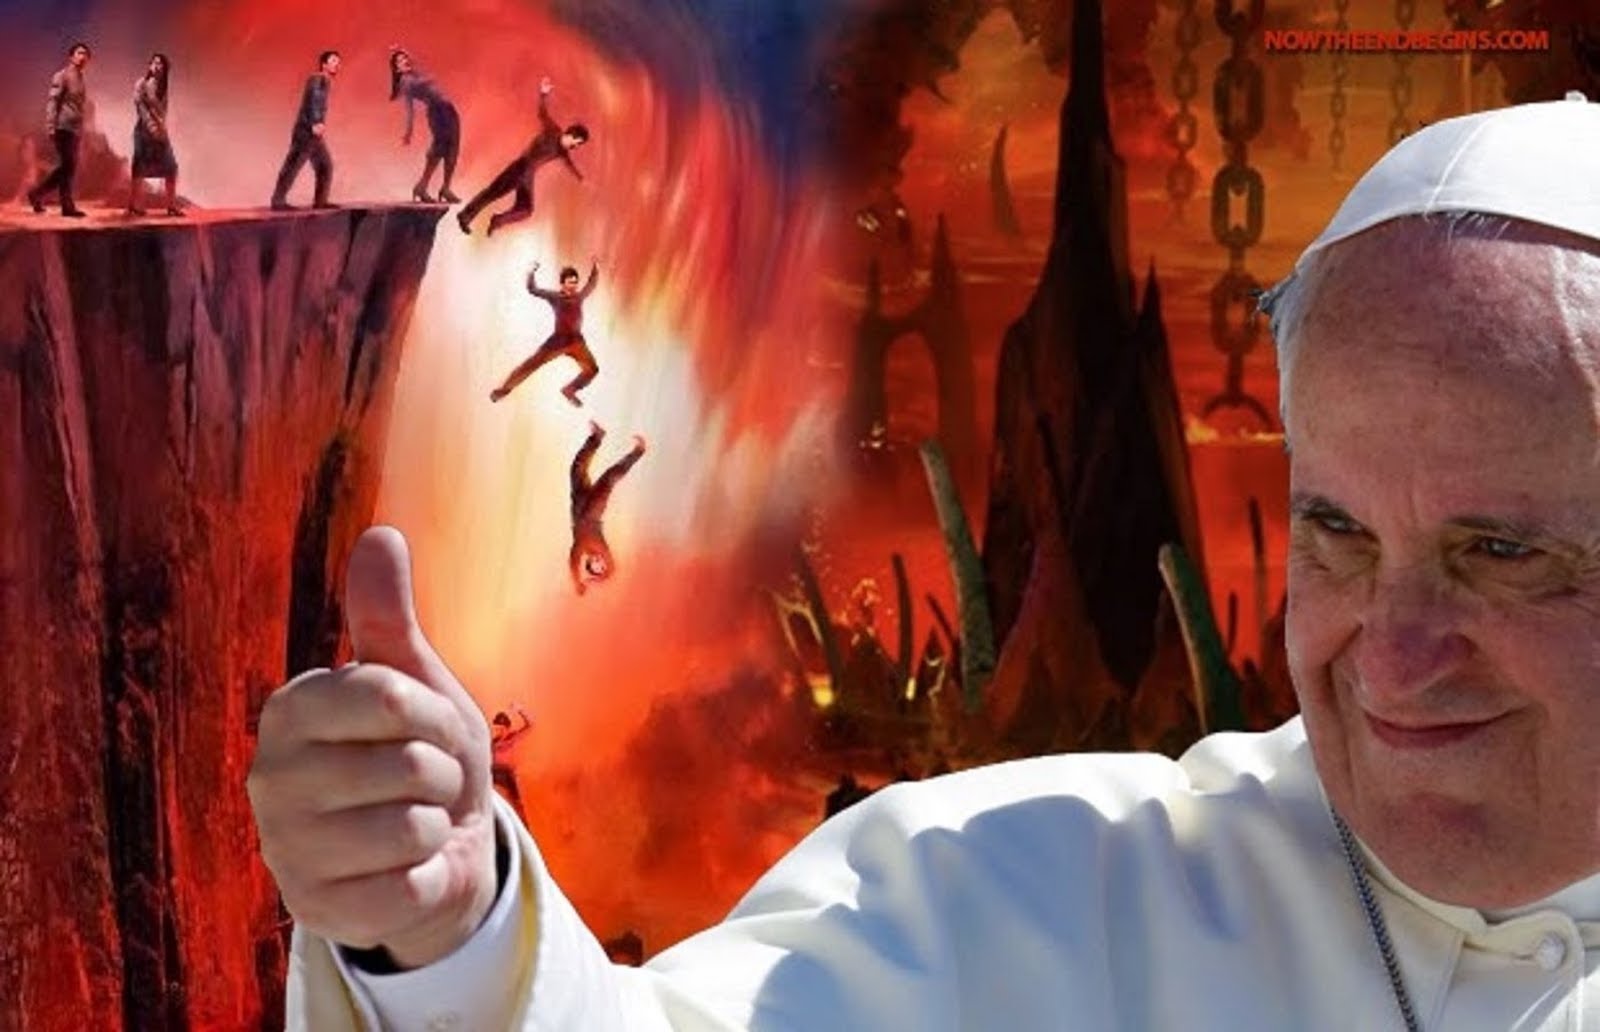 POPE FRANCIS LEADING PEOPLE TO HELL